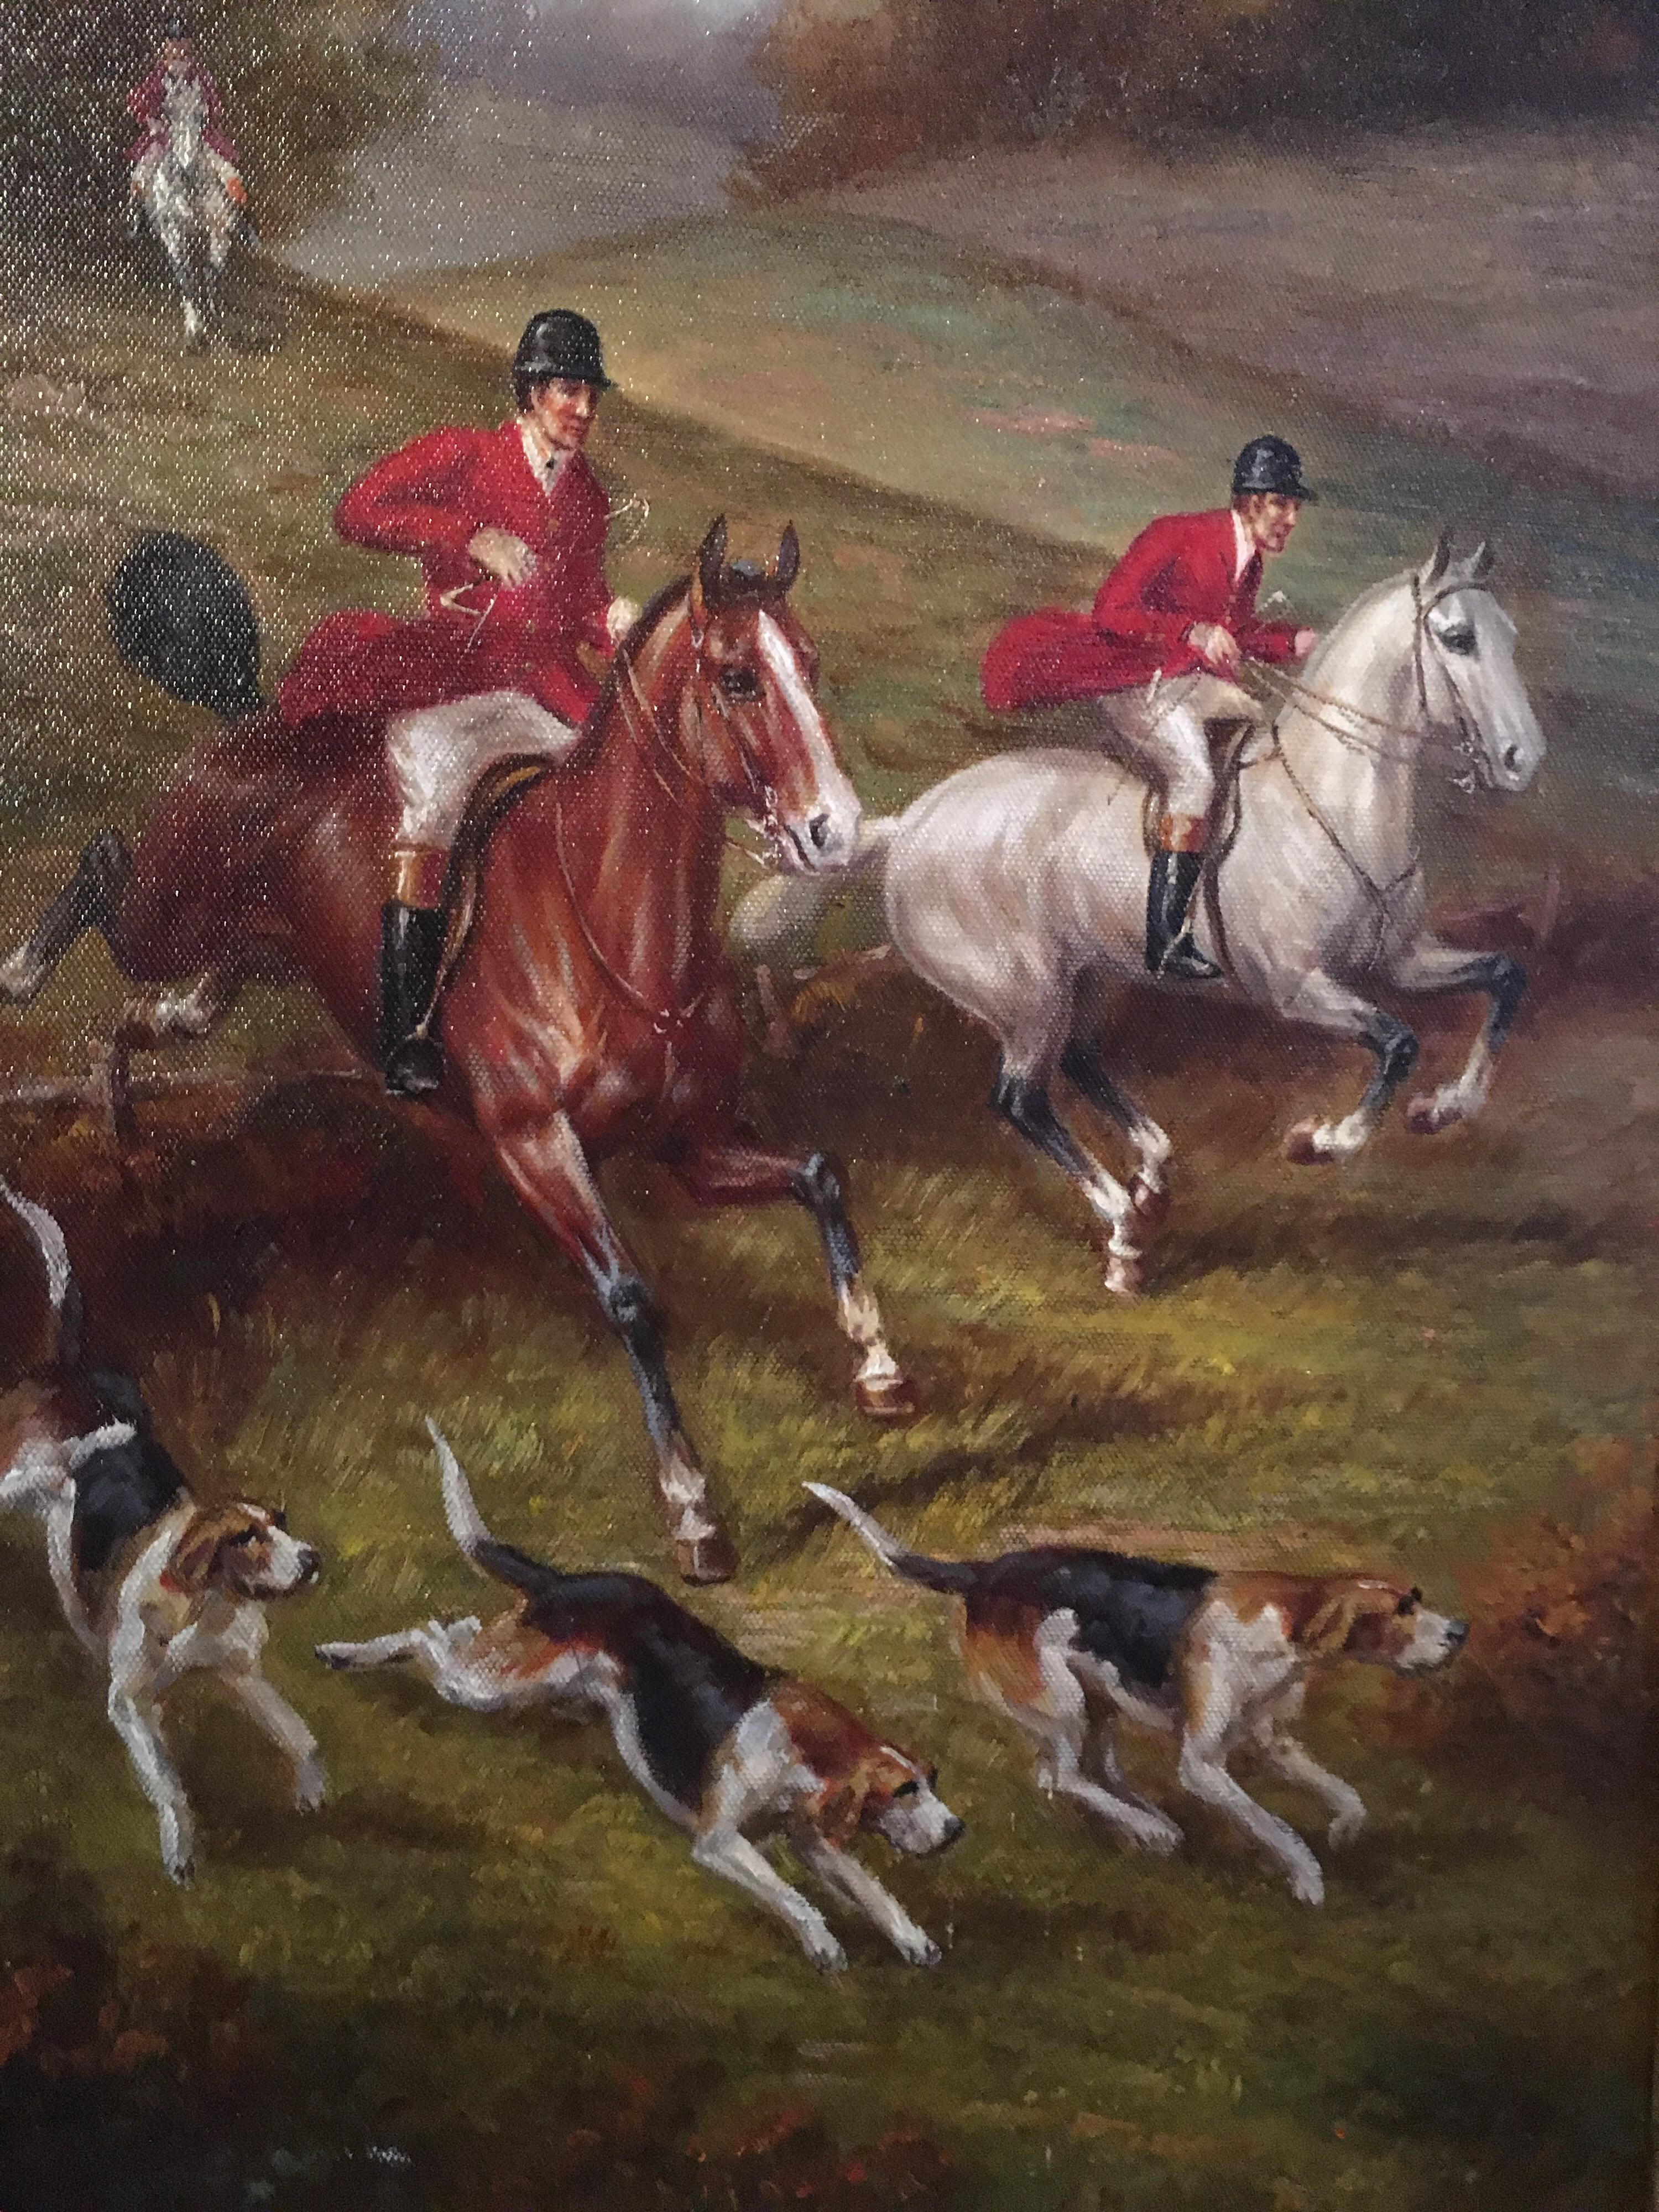 Fox Hunt Original Oil Painting (2), Impressionist Landscape, British, Signed
By British artist Jack Leyine, Mid 20th Century
Signed by the artist on the lower left hand corner
Oil painting on canvas, framed
Framed size: 30 x 17.5 inches

Fabulously